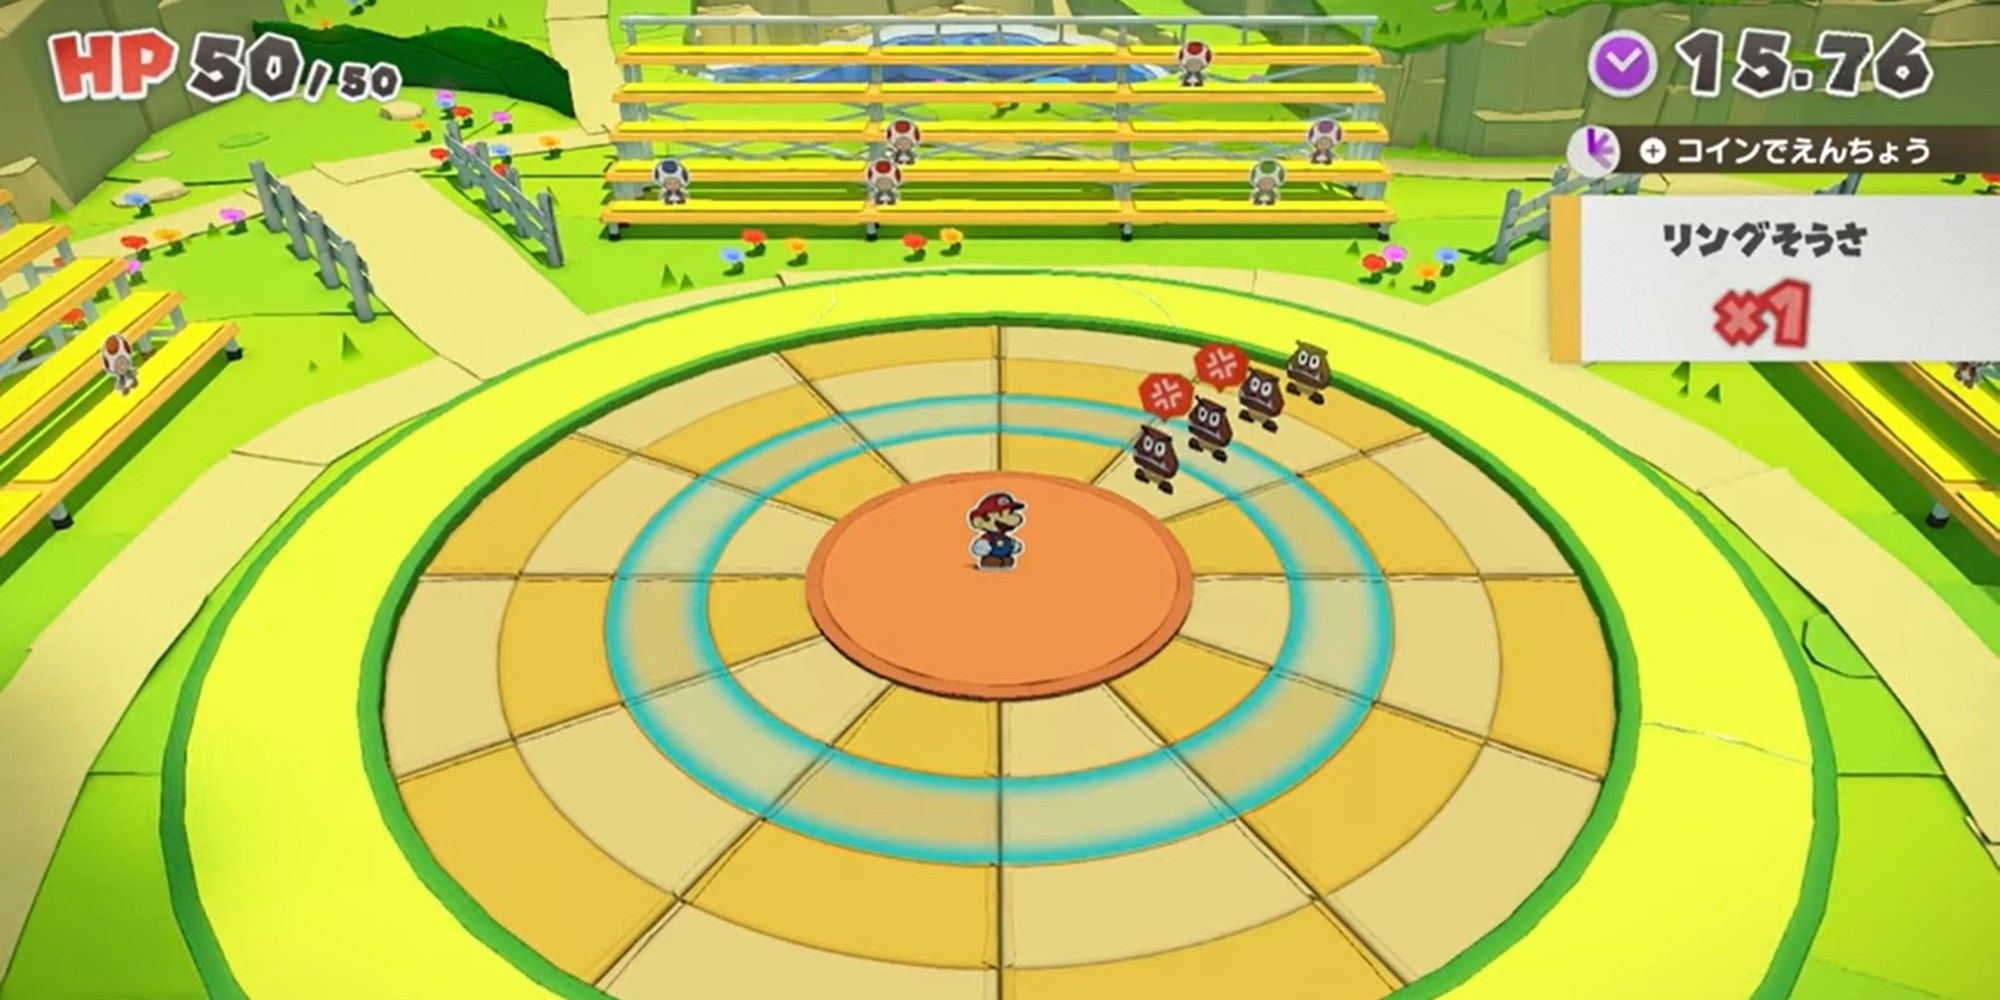 The battle ring for Paper Mario: The Origami King